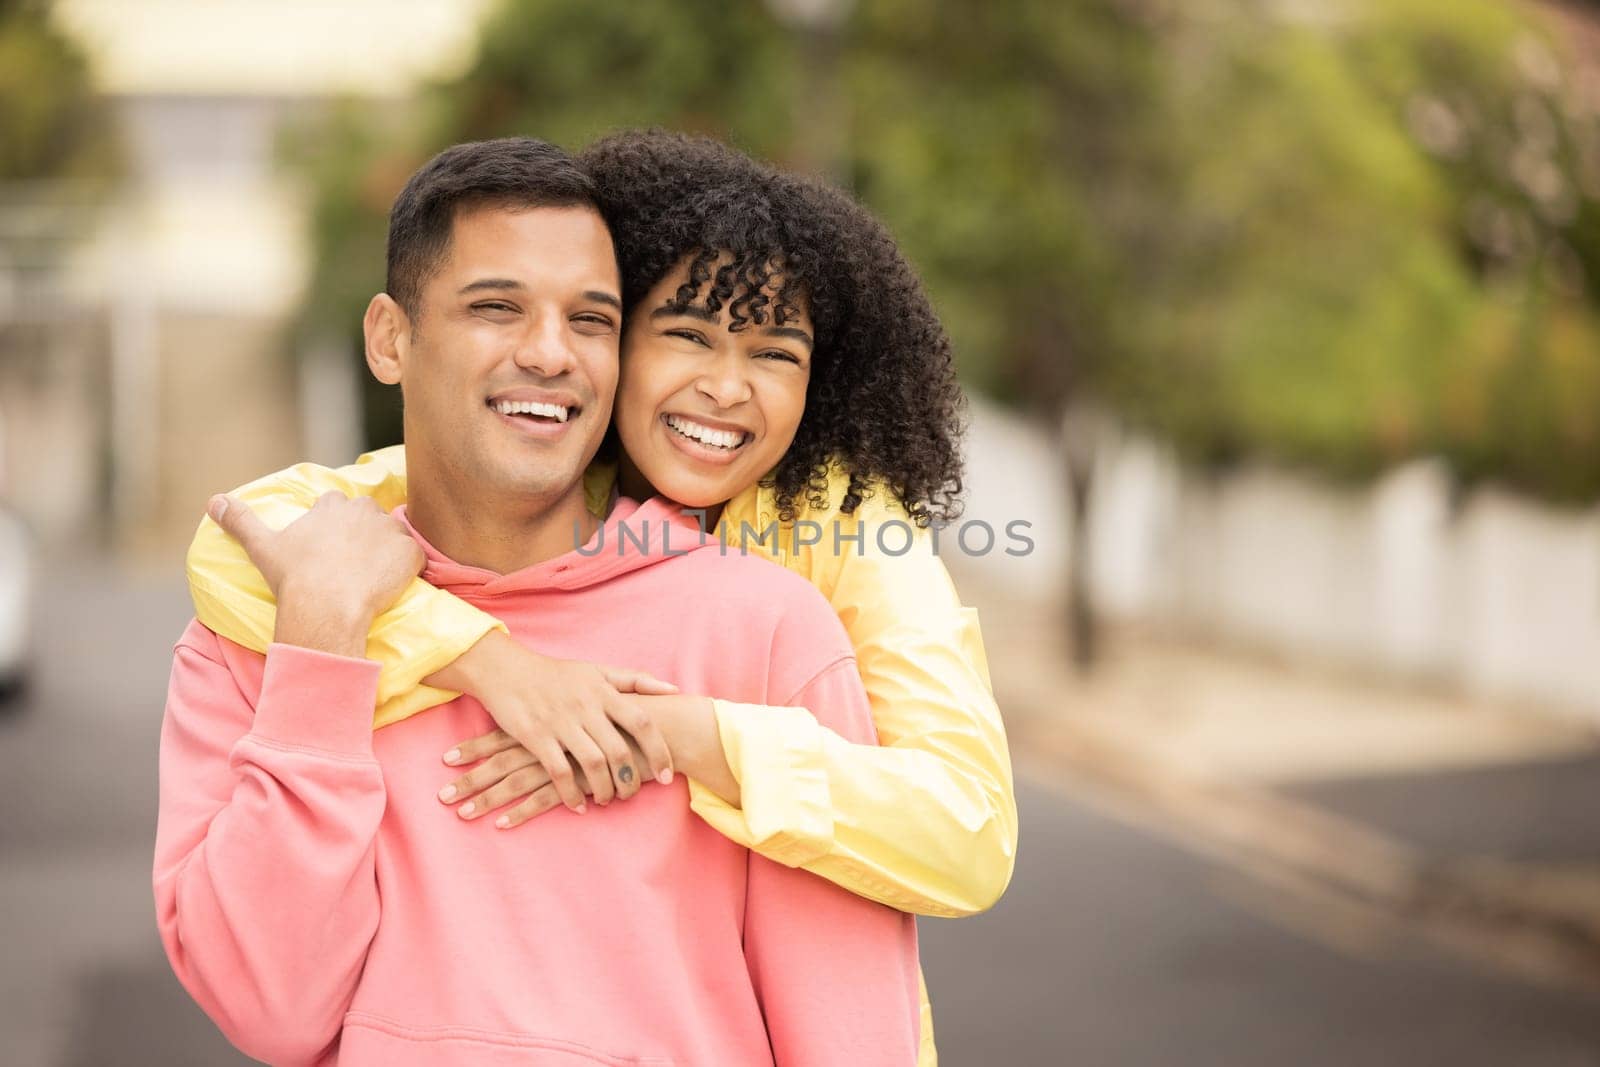 Black couple, smile and hug portrait of young people with love, care and bonding outdoor. Happy woman, man and summer fun of people on a street walking with happiness on vacation smiling together by YuriArcurs